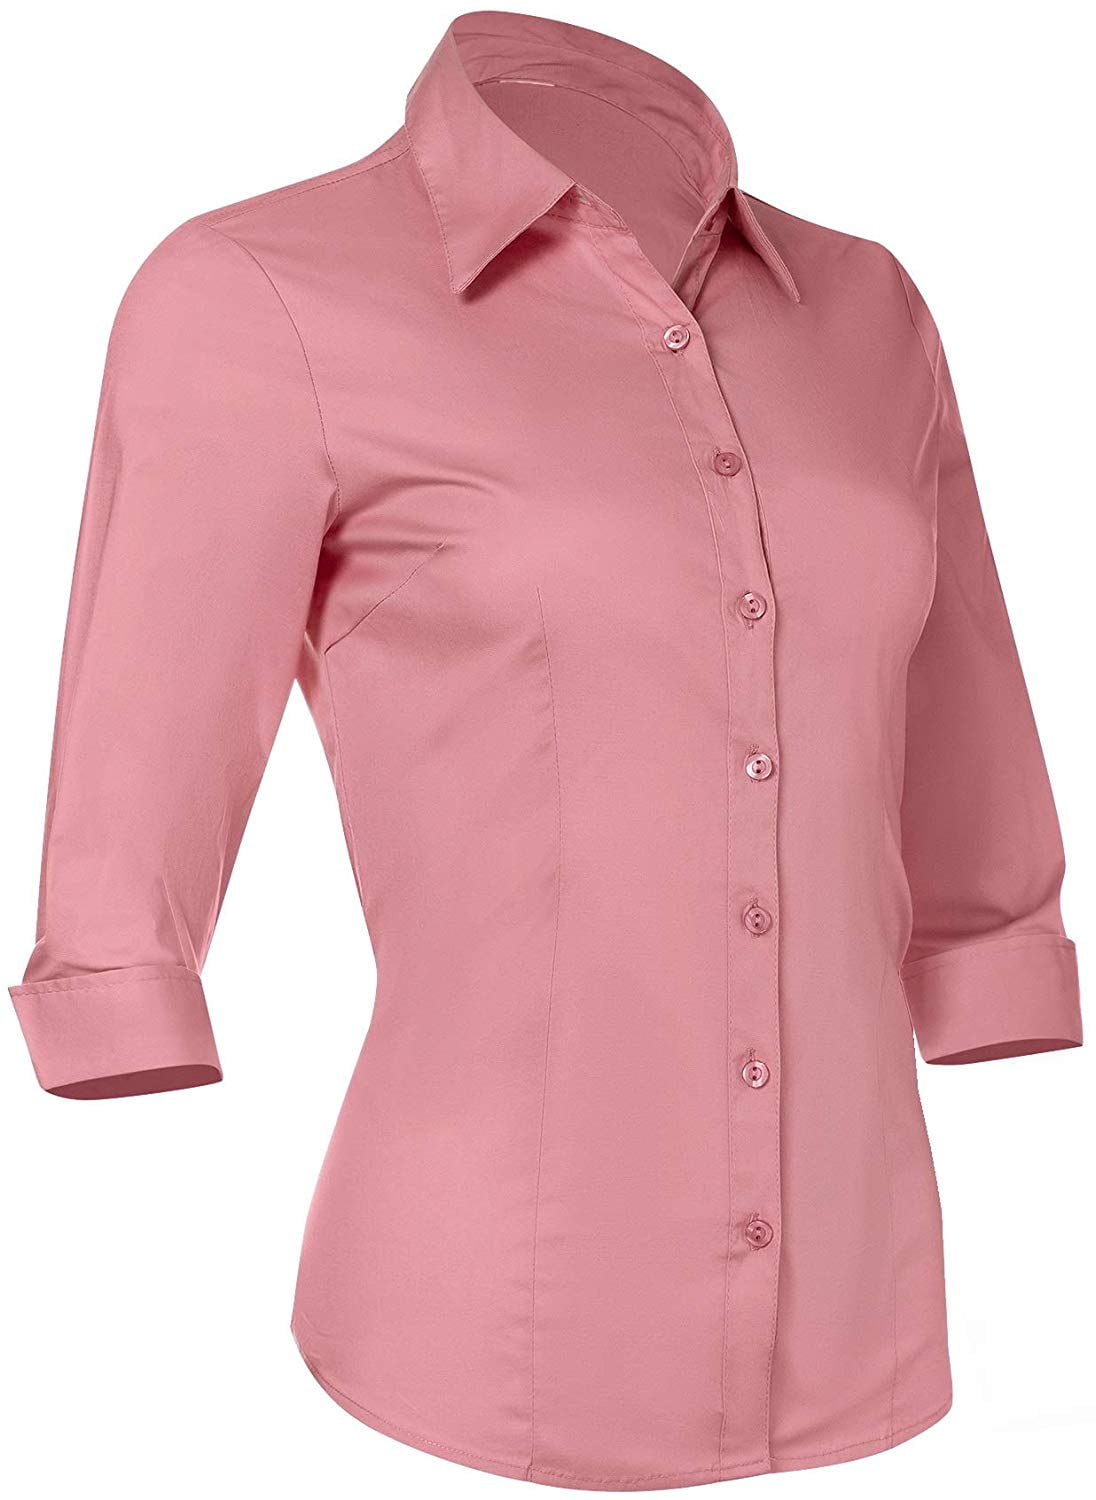 Sleeve Fitted Dress Shirt and Blouses ...